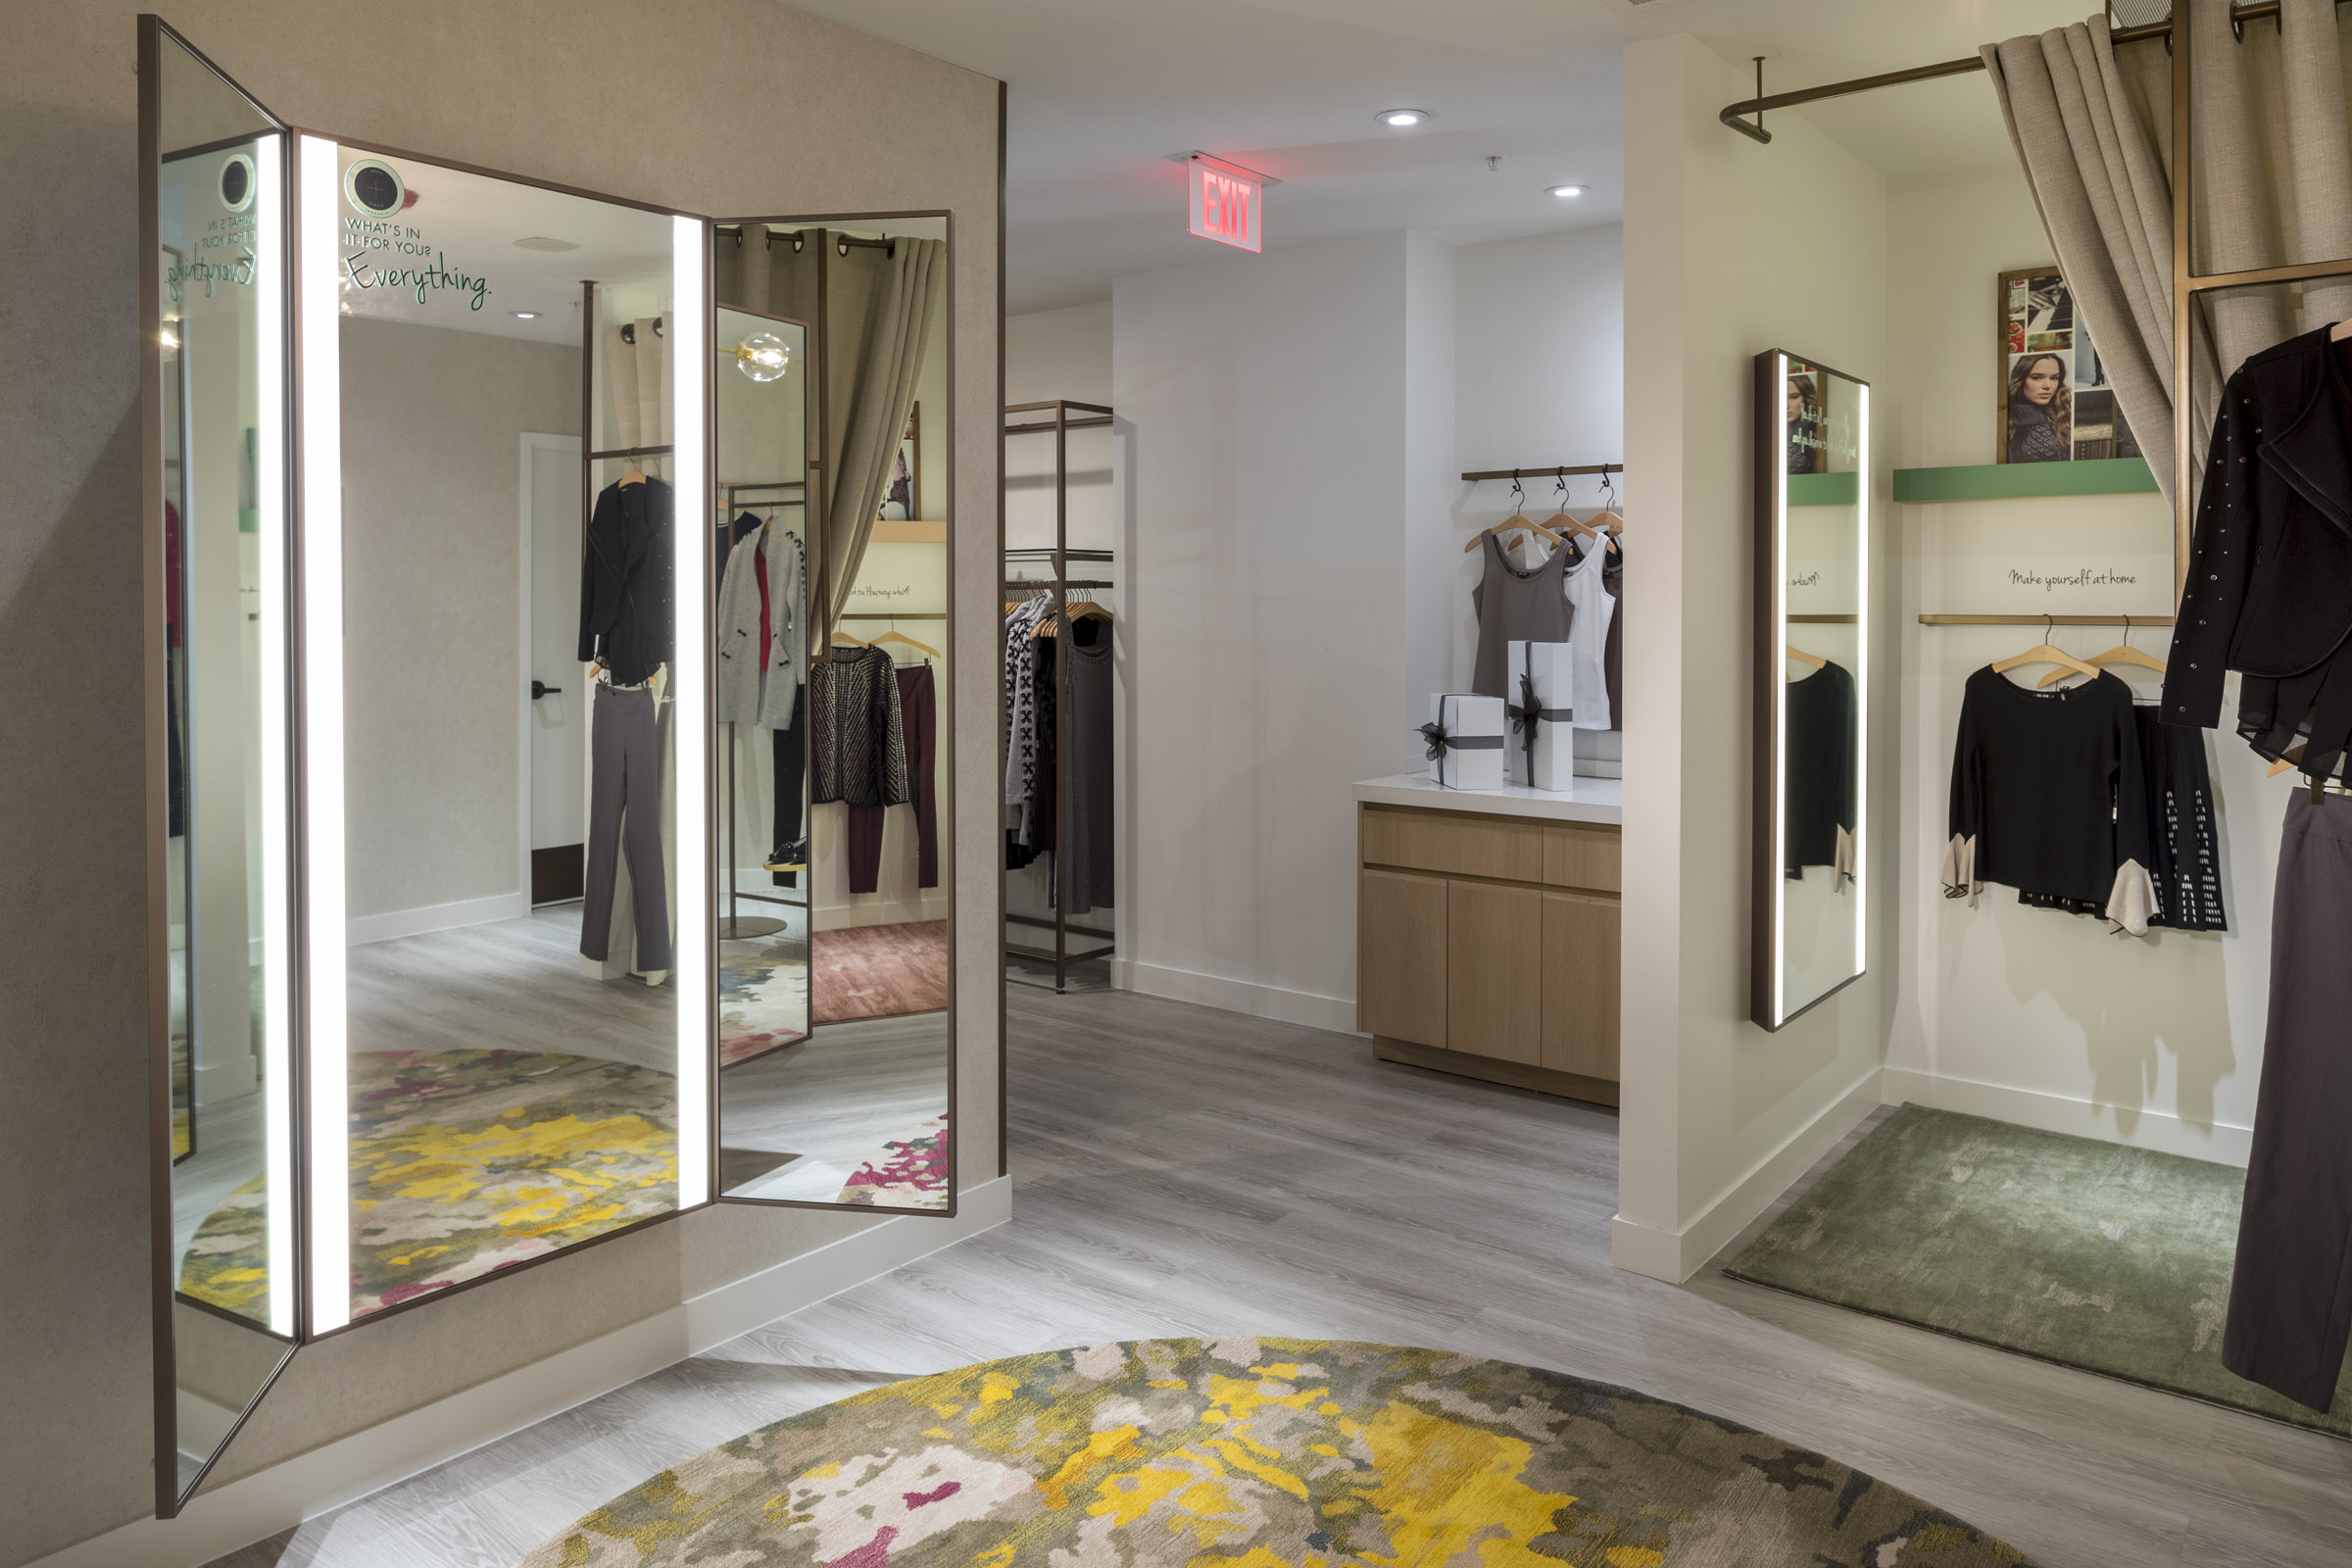 Stylmark: FITTING ROOM Installations: image gallery examples